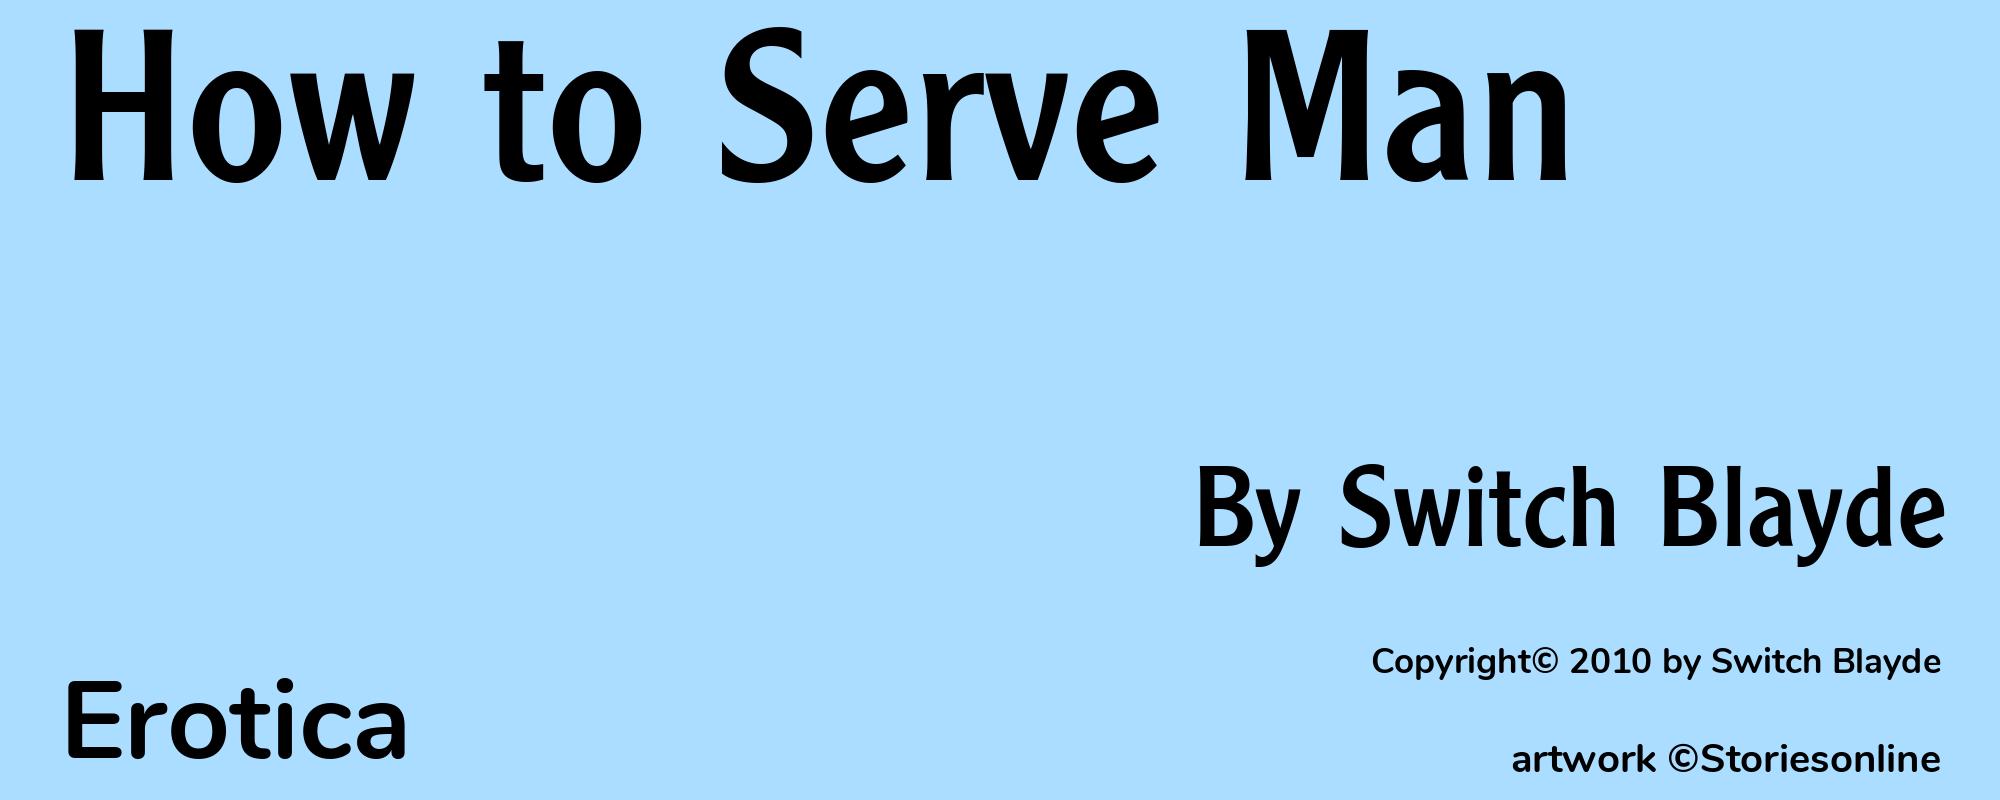 How to Serve Man - Cover